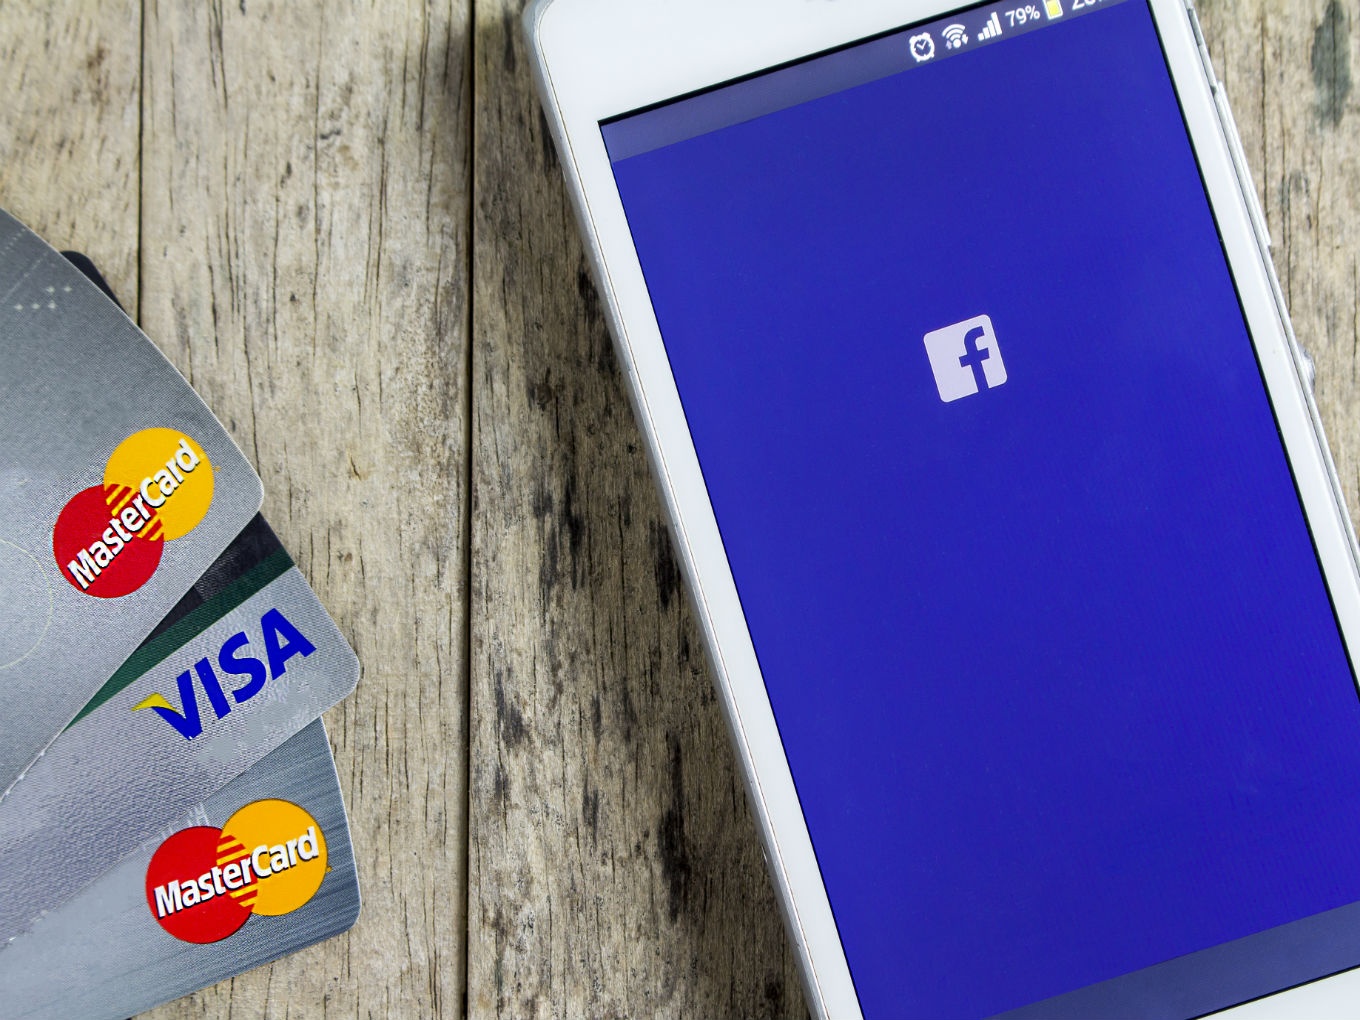 after-whatsapp-is-facebook-an-also-enabling-a-payments-feature